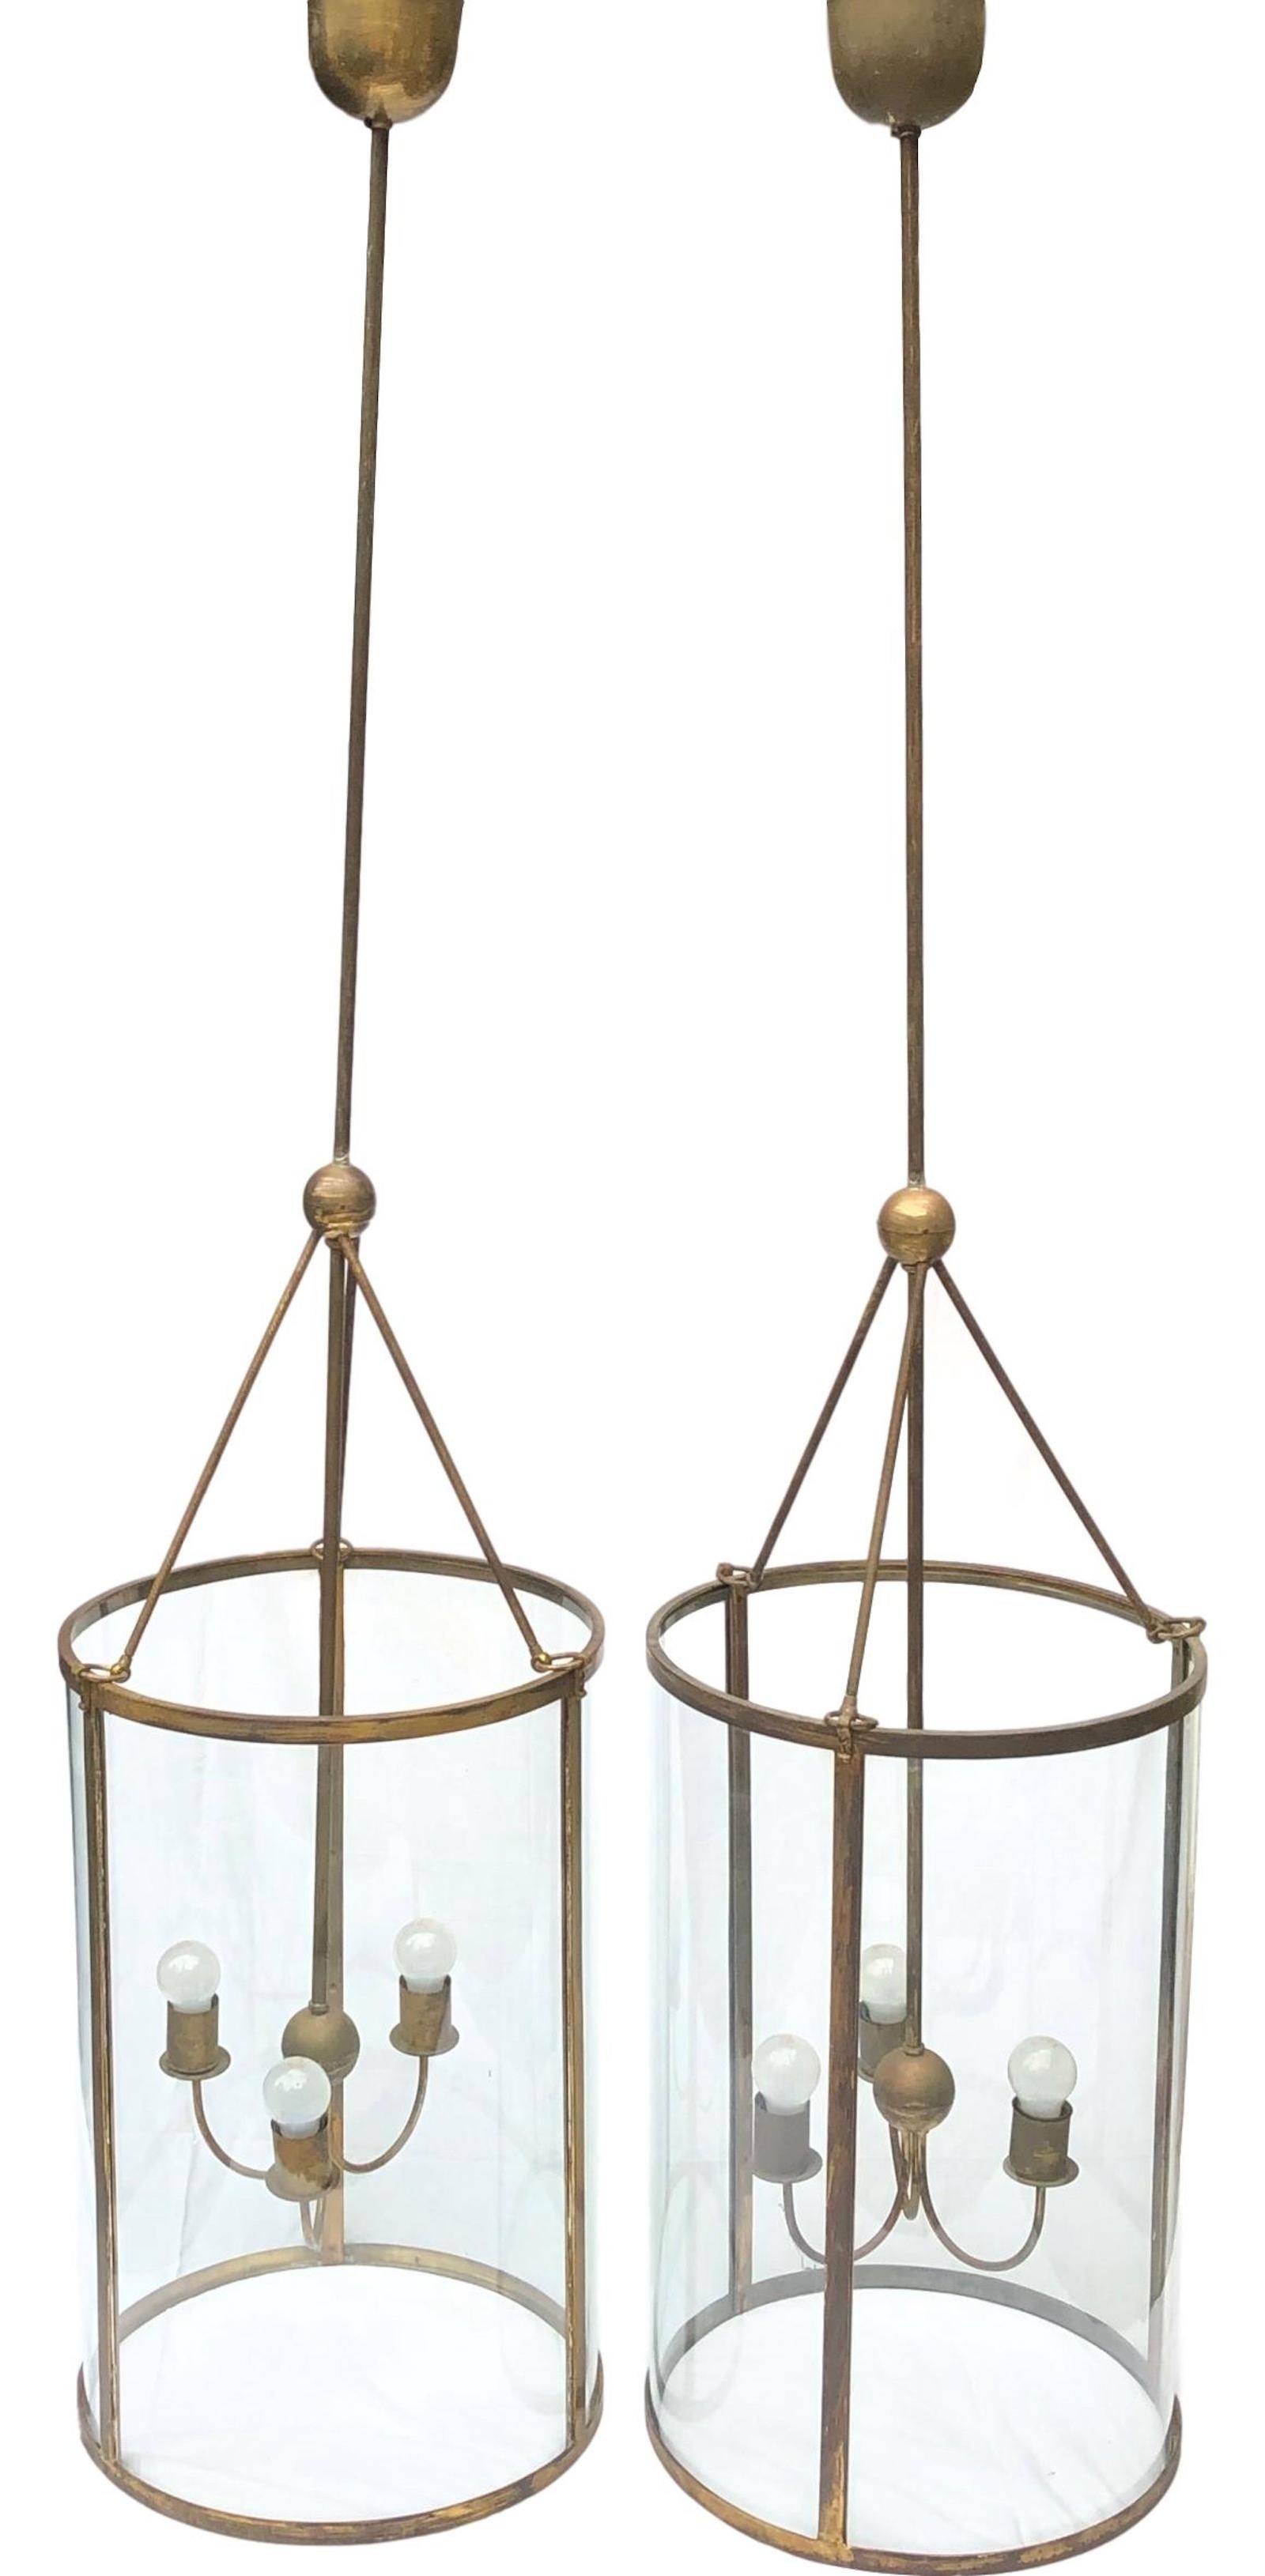 Gorgeous pair of monumental size brass and glass Art Deco chandeliers. Each is in very good condition and requires three European E27 / 110 volt Edison bulbs, each bulb up to 100 watts. The glass is handmade, also the brass frame. The light is wired